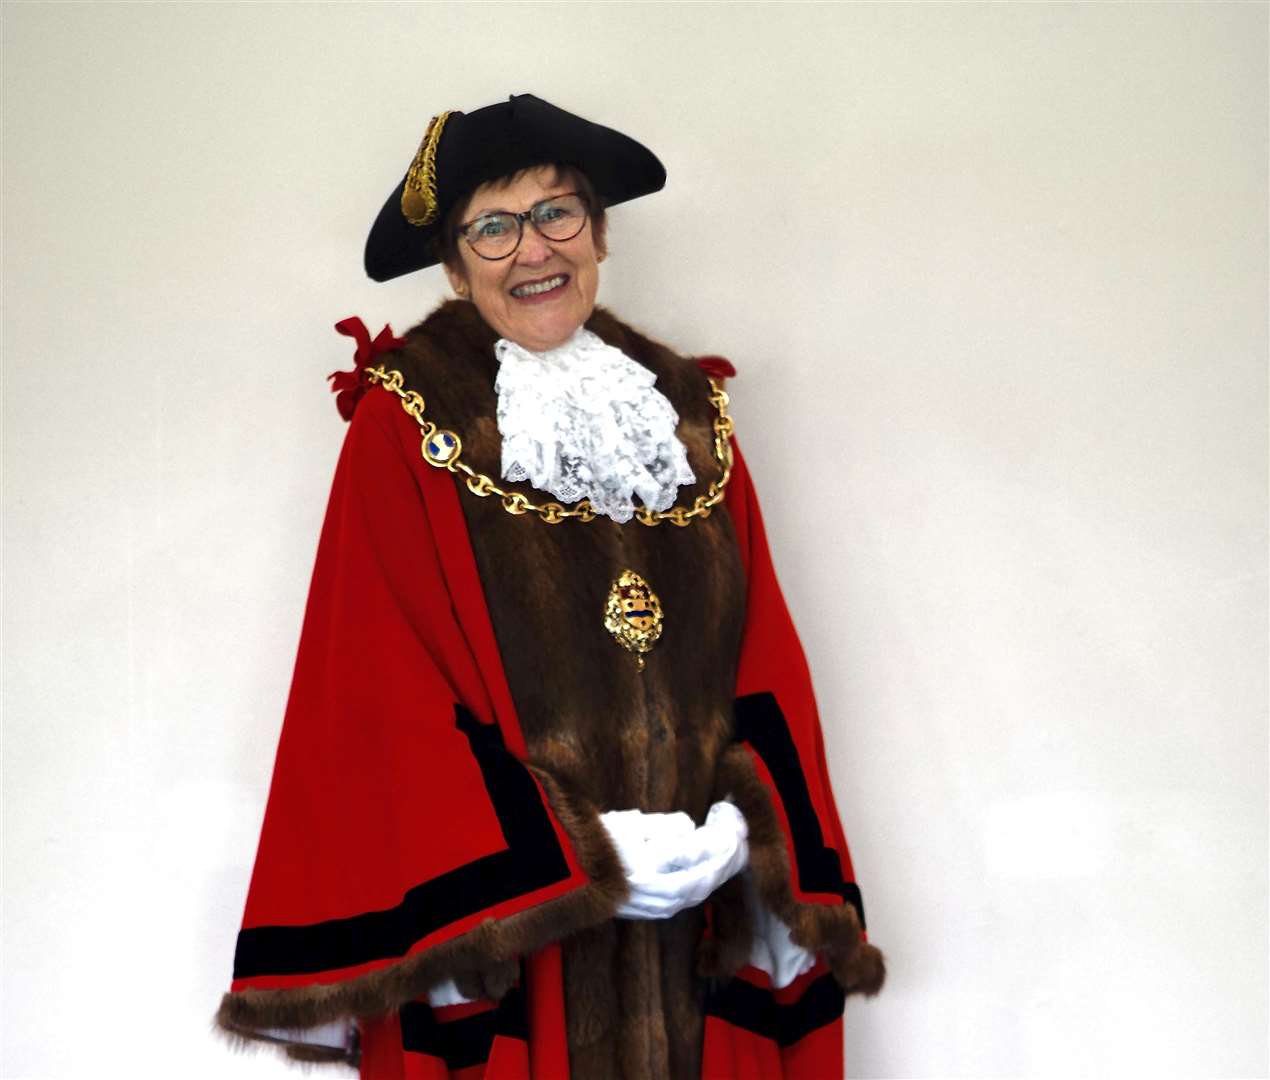 The new Mayor of Maidstone, Cllr Fay Gooch, will attend the cricket tournament this weekend